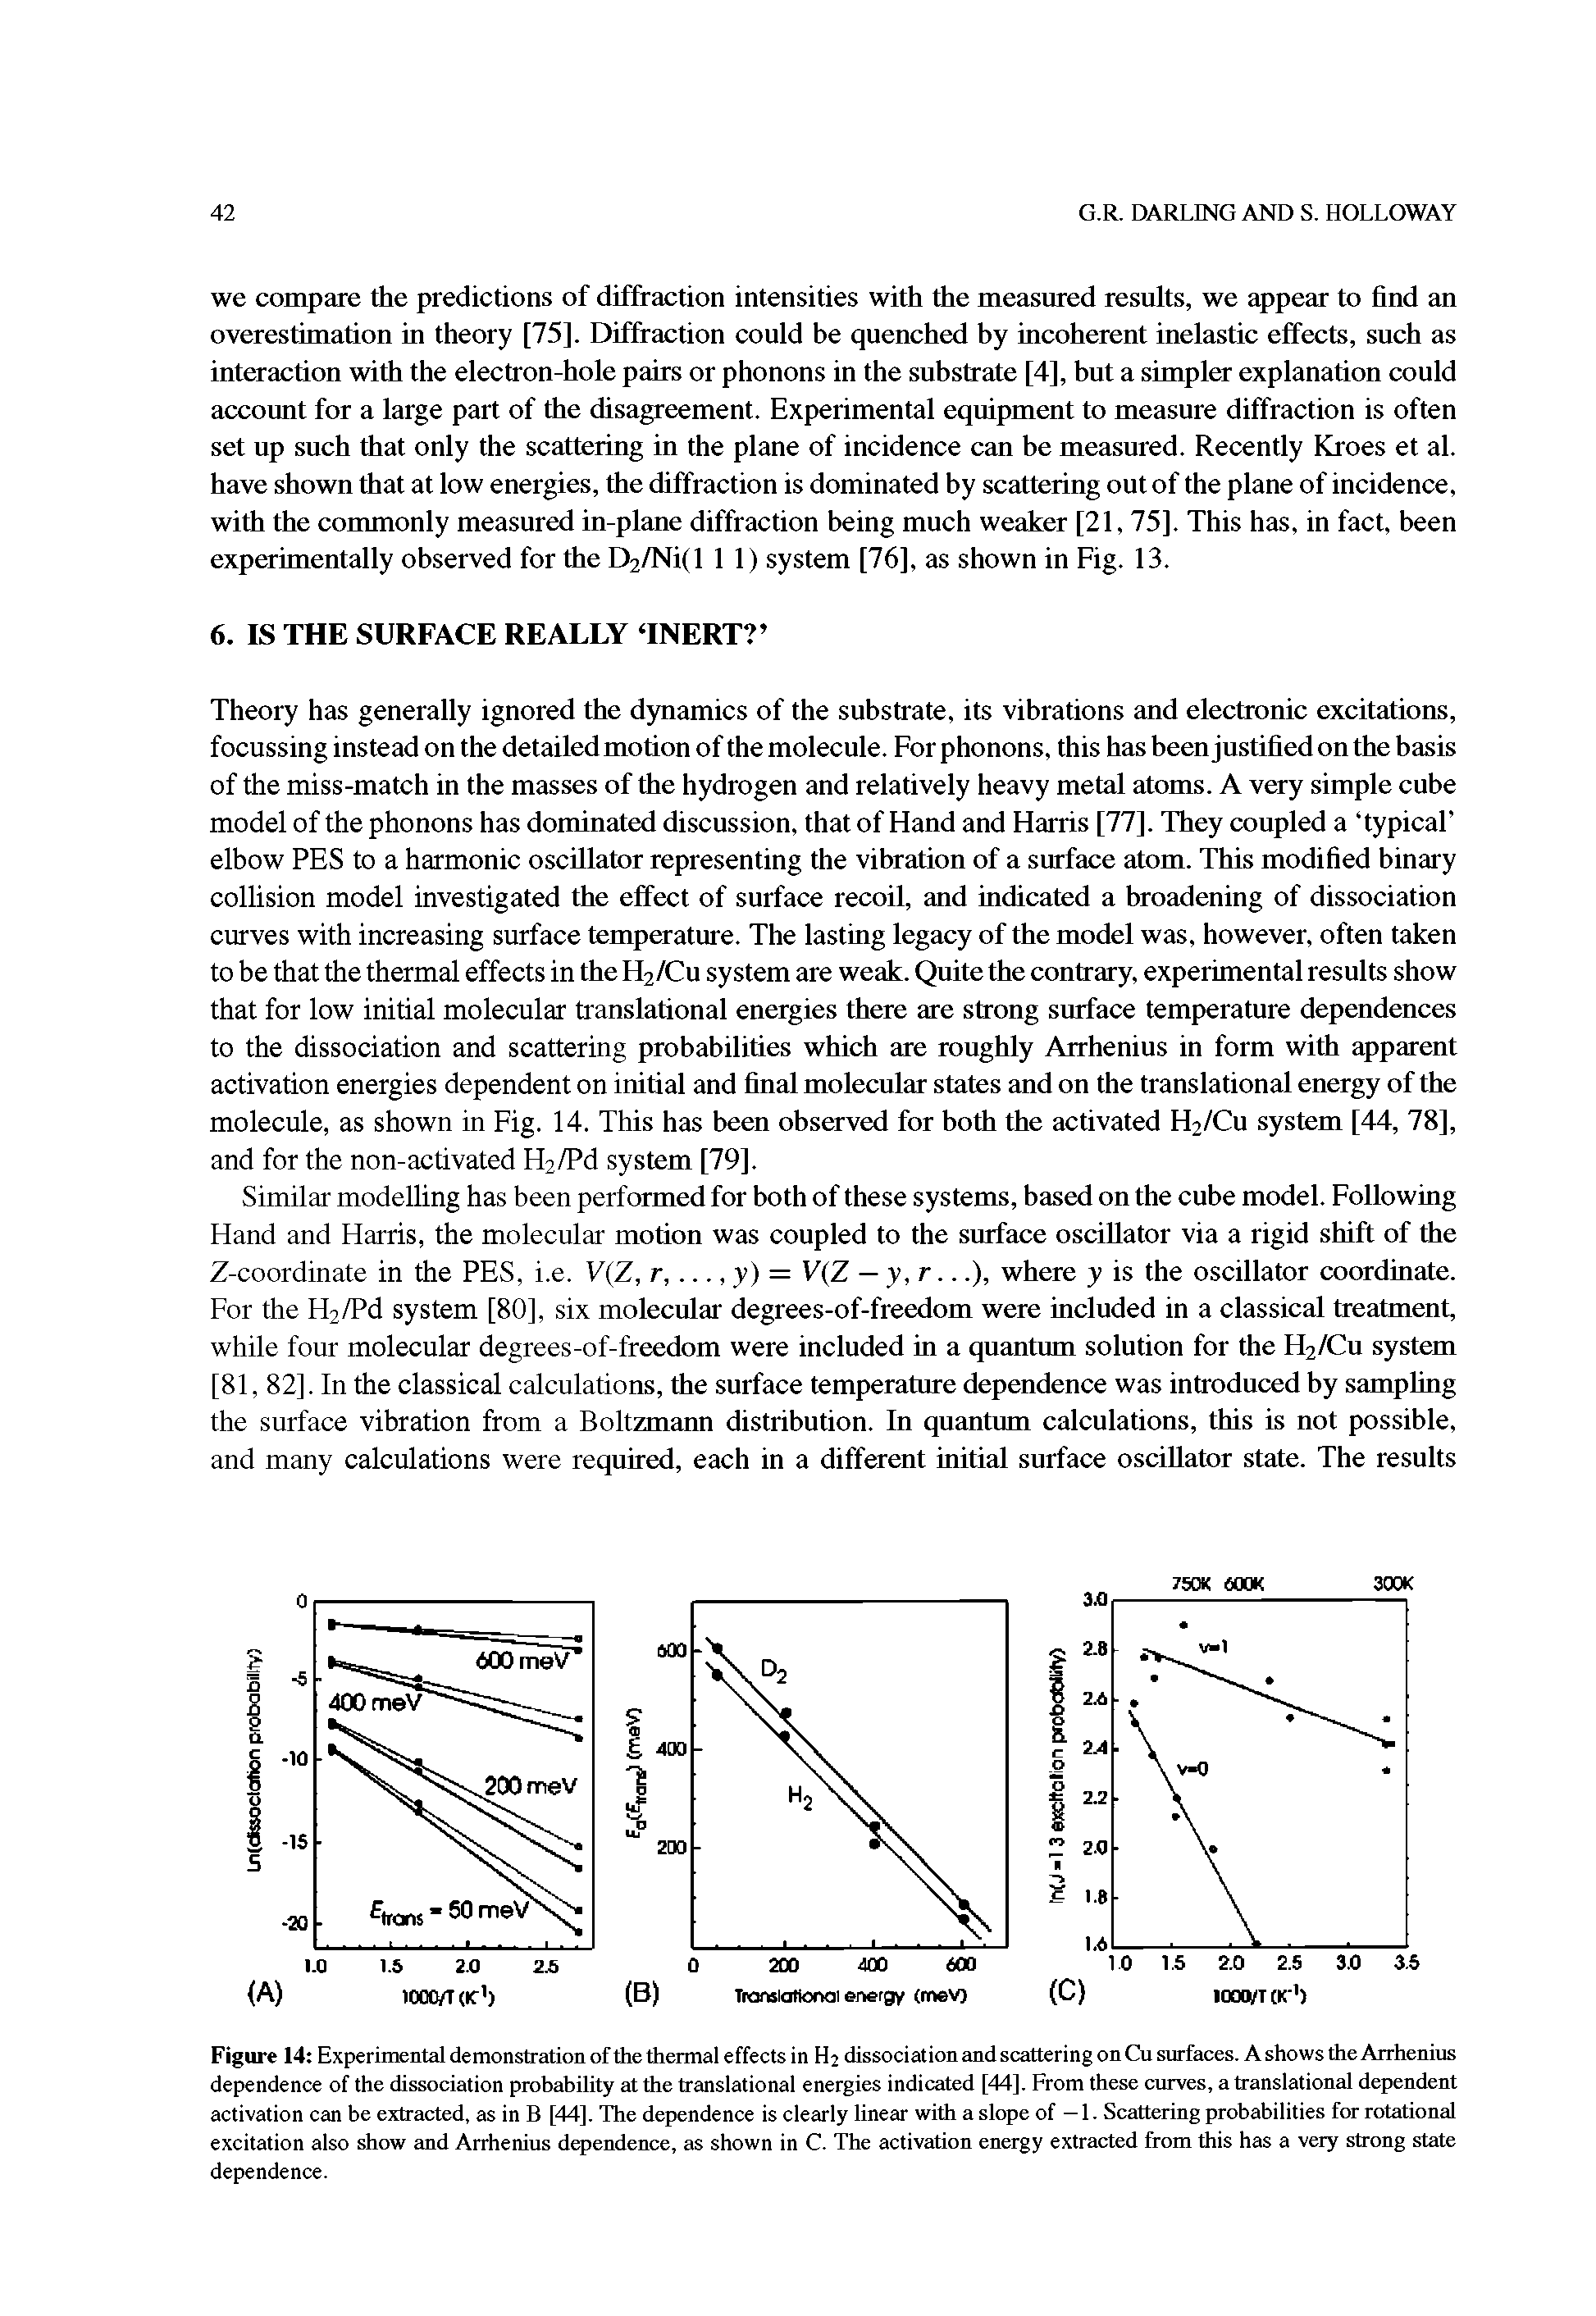 Figure 14 Experimental demonstration of the thermal effects in H2 dissociation and scattering on Cu surfaces. A shows the Arrhenius dependence of the dissociation probability at die translational energies indicated [44]. From these curves, a translational dependent activation can be extracted, as in B [44]. The dependence is clearly linear with a slope of — 1. Scattering probabilities for rotational excitation also show and Arrhenius dependence, as shown in C. The activation energy extracted from this has a very strong state dependence.